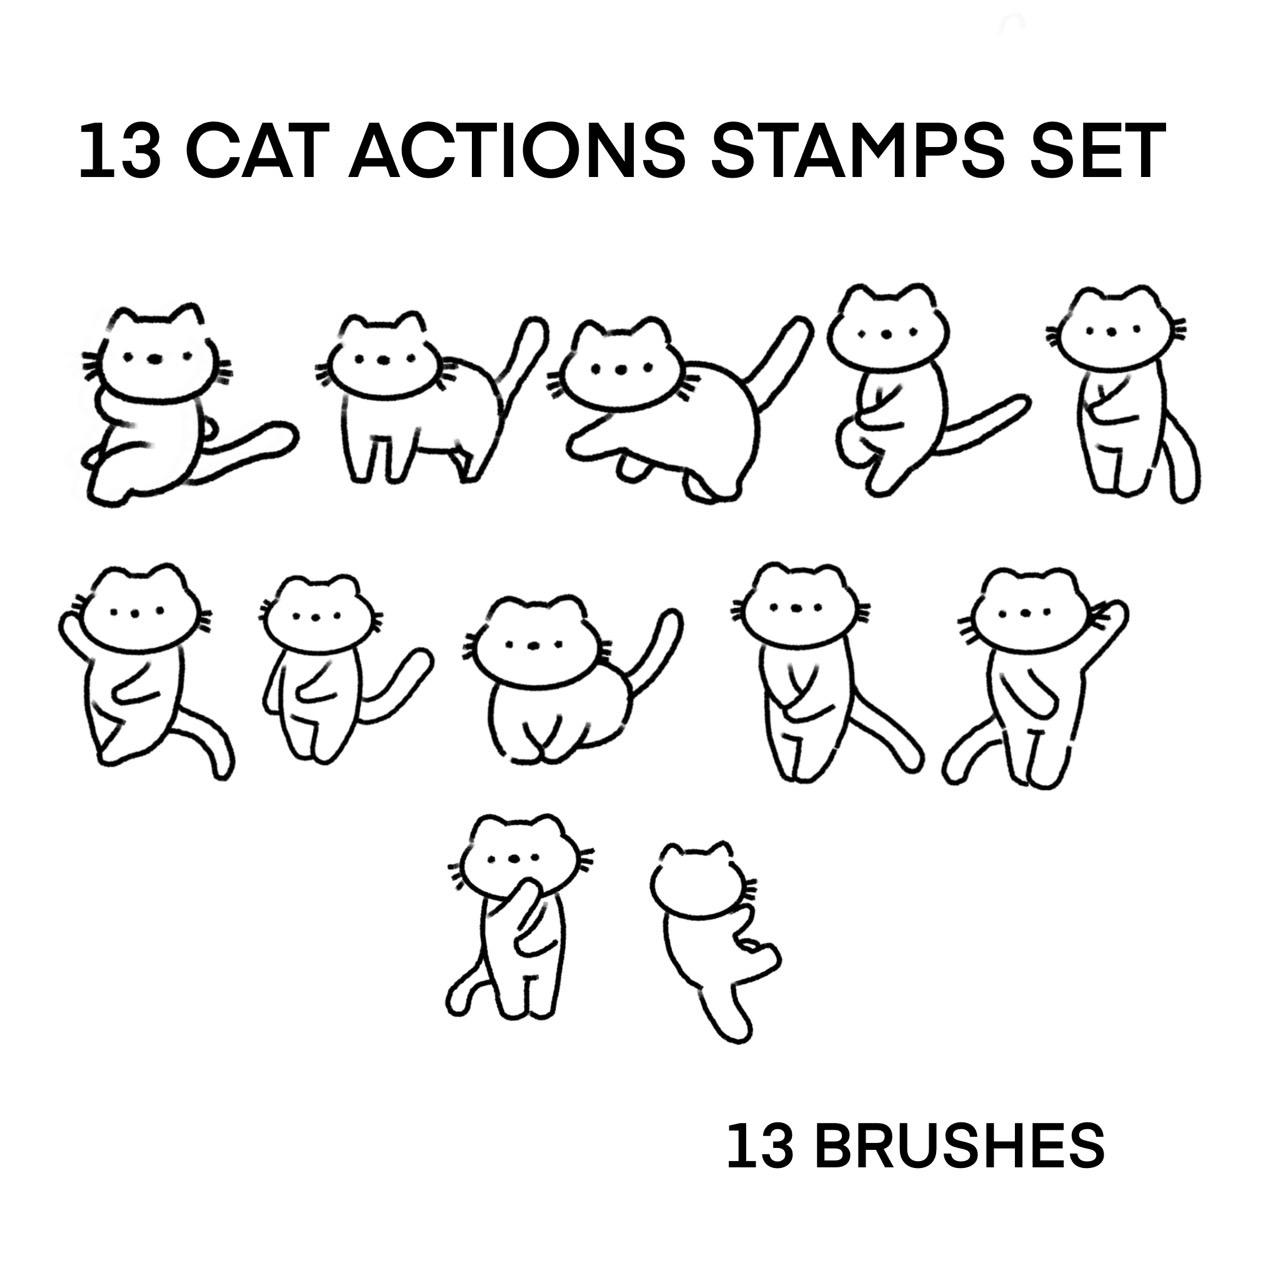 13 CAT ACTIONS STAMPS SET